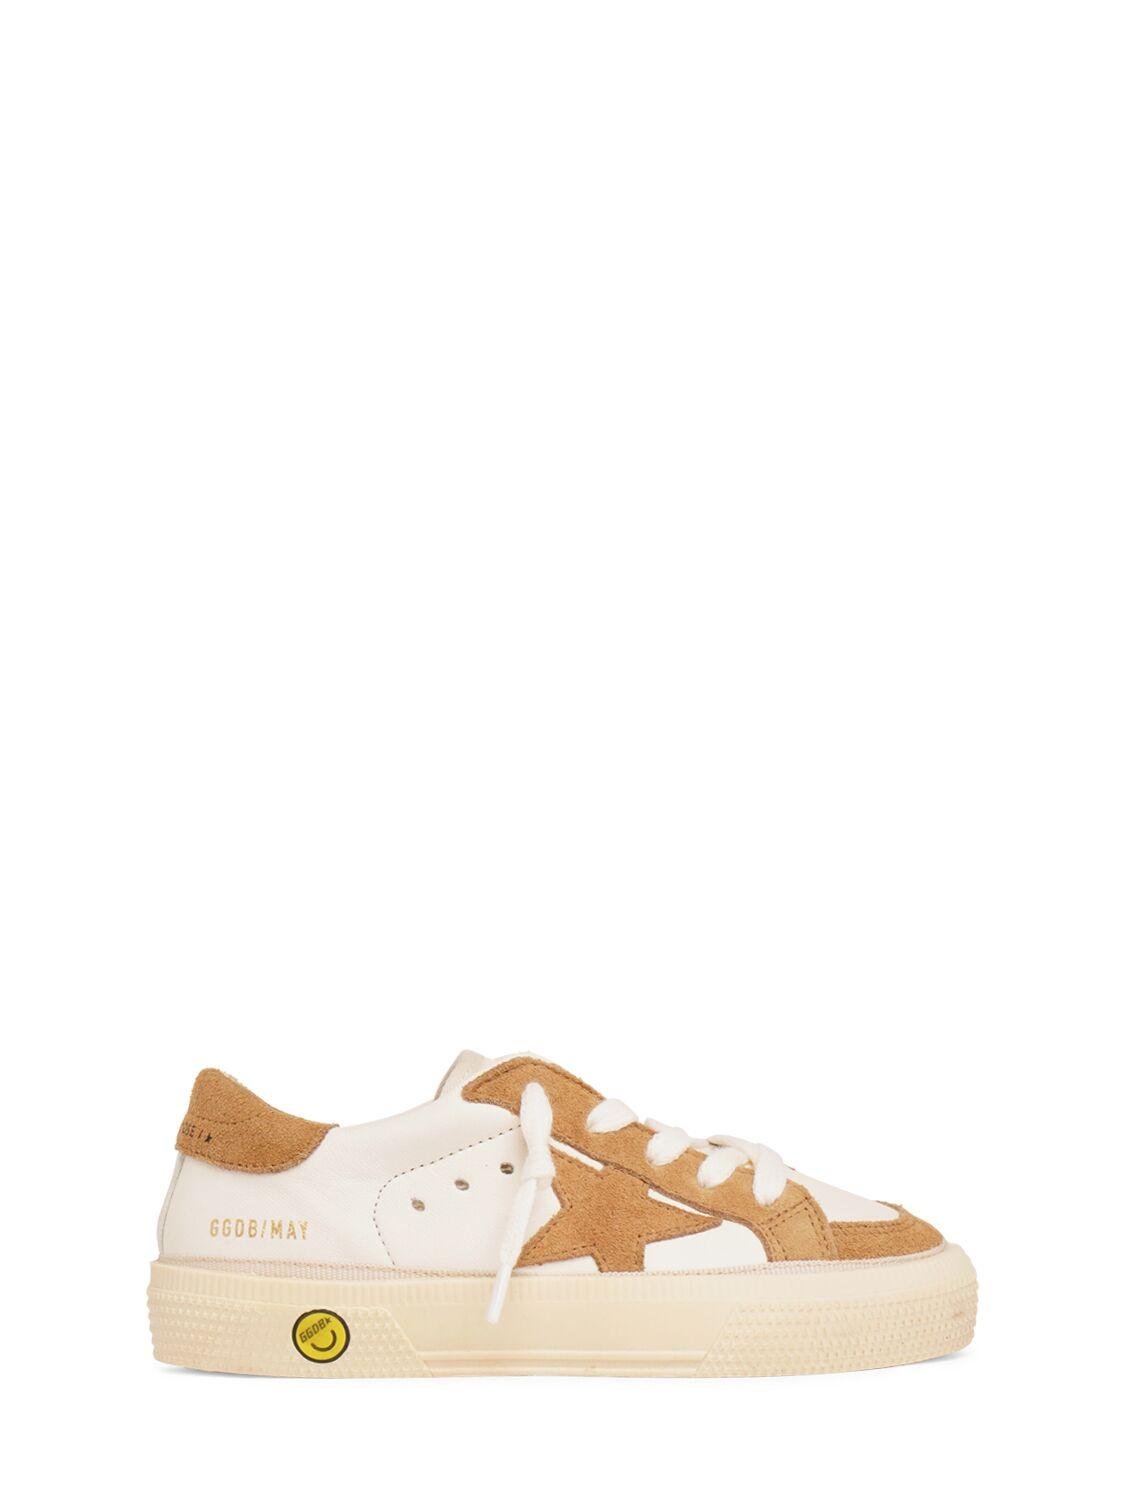 May Leather Lace-up Sneakers by GOLDEN GOOSE